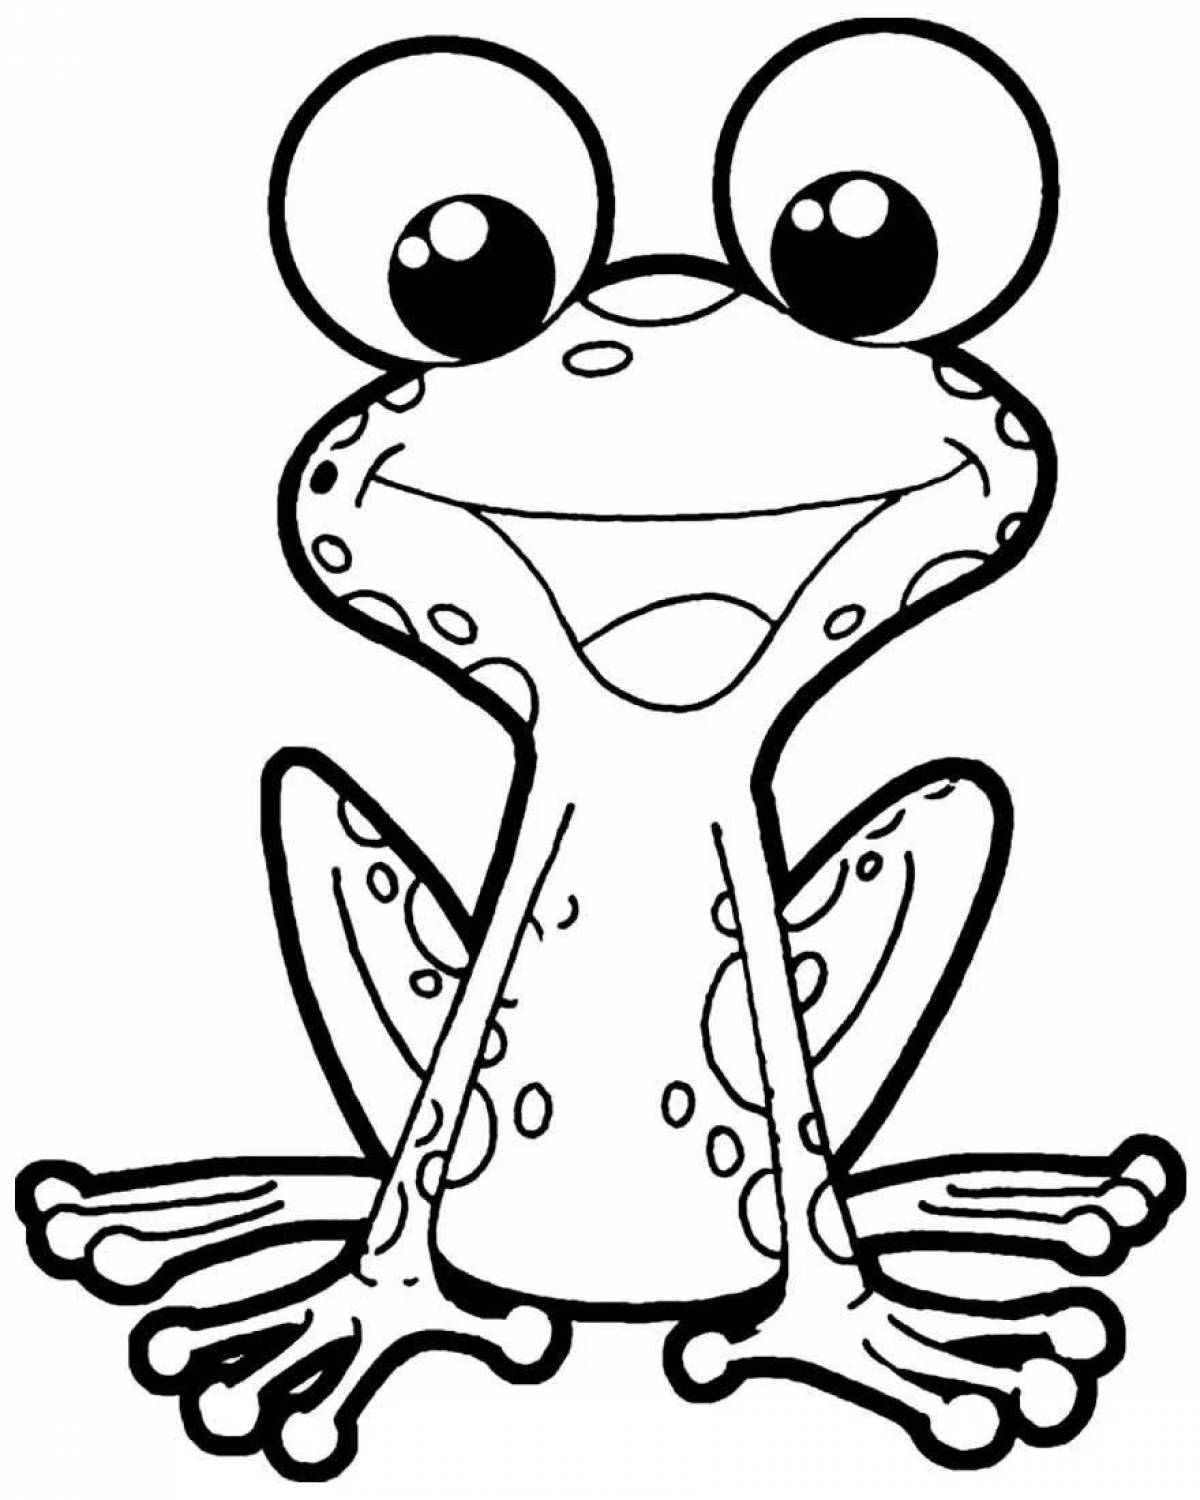 Coloring page happy frog